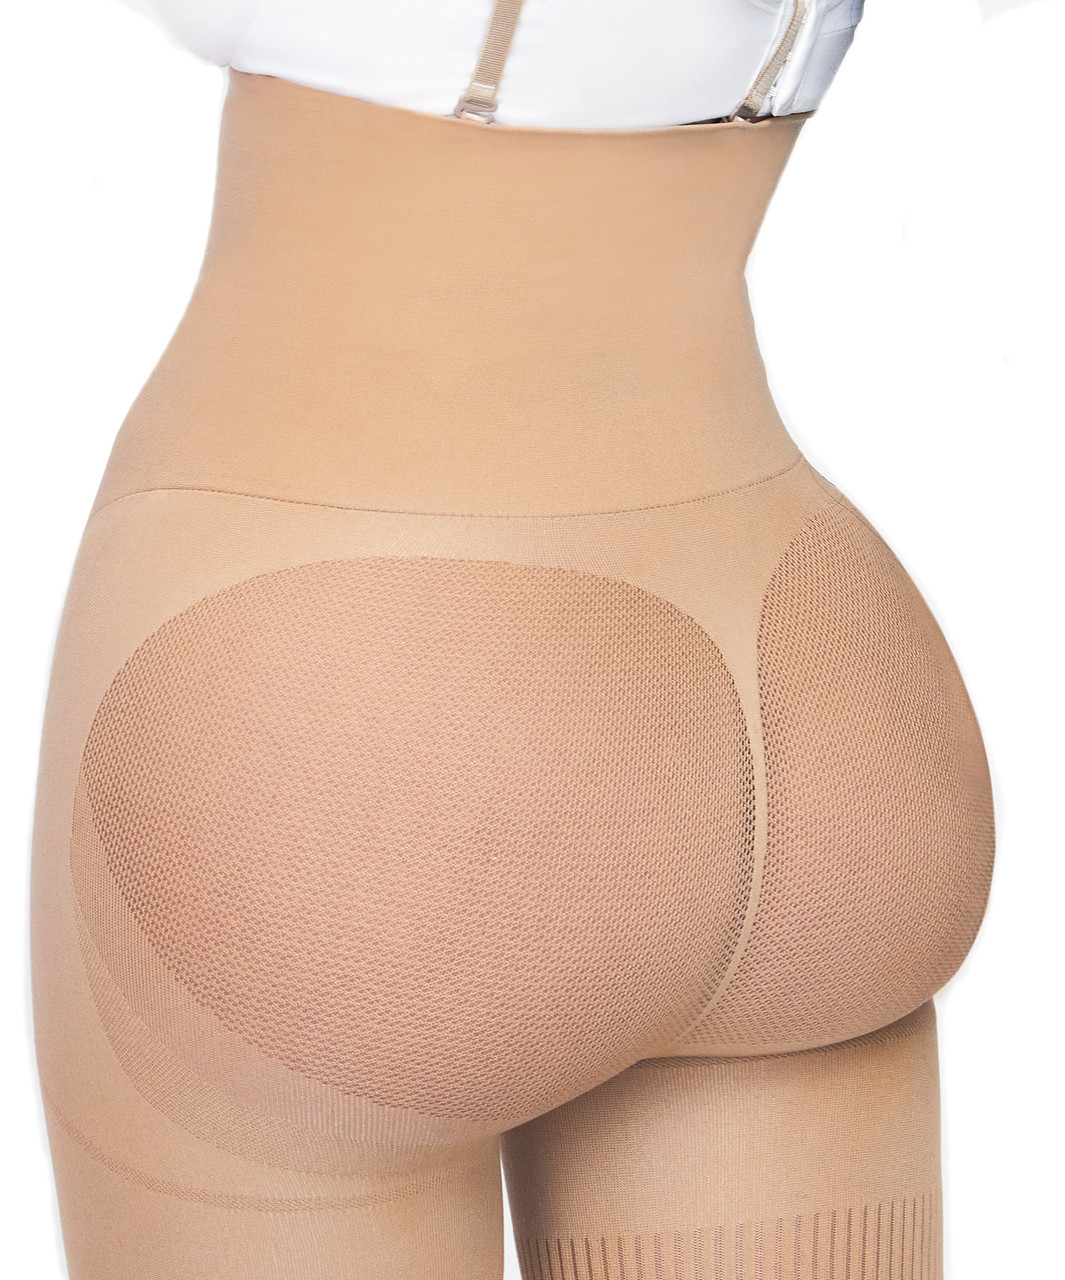 Shop Yahaira - The seamless invisible body shaper that shapes your body  without flattening your butt & attaches to any bra. 💕 If you want to know  your size please write your